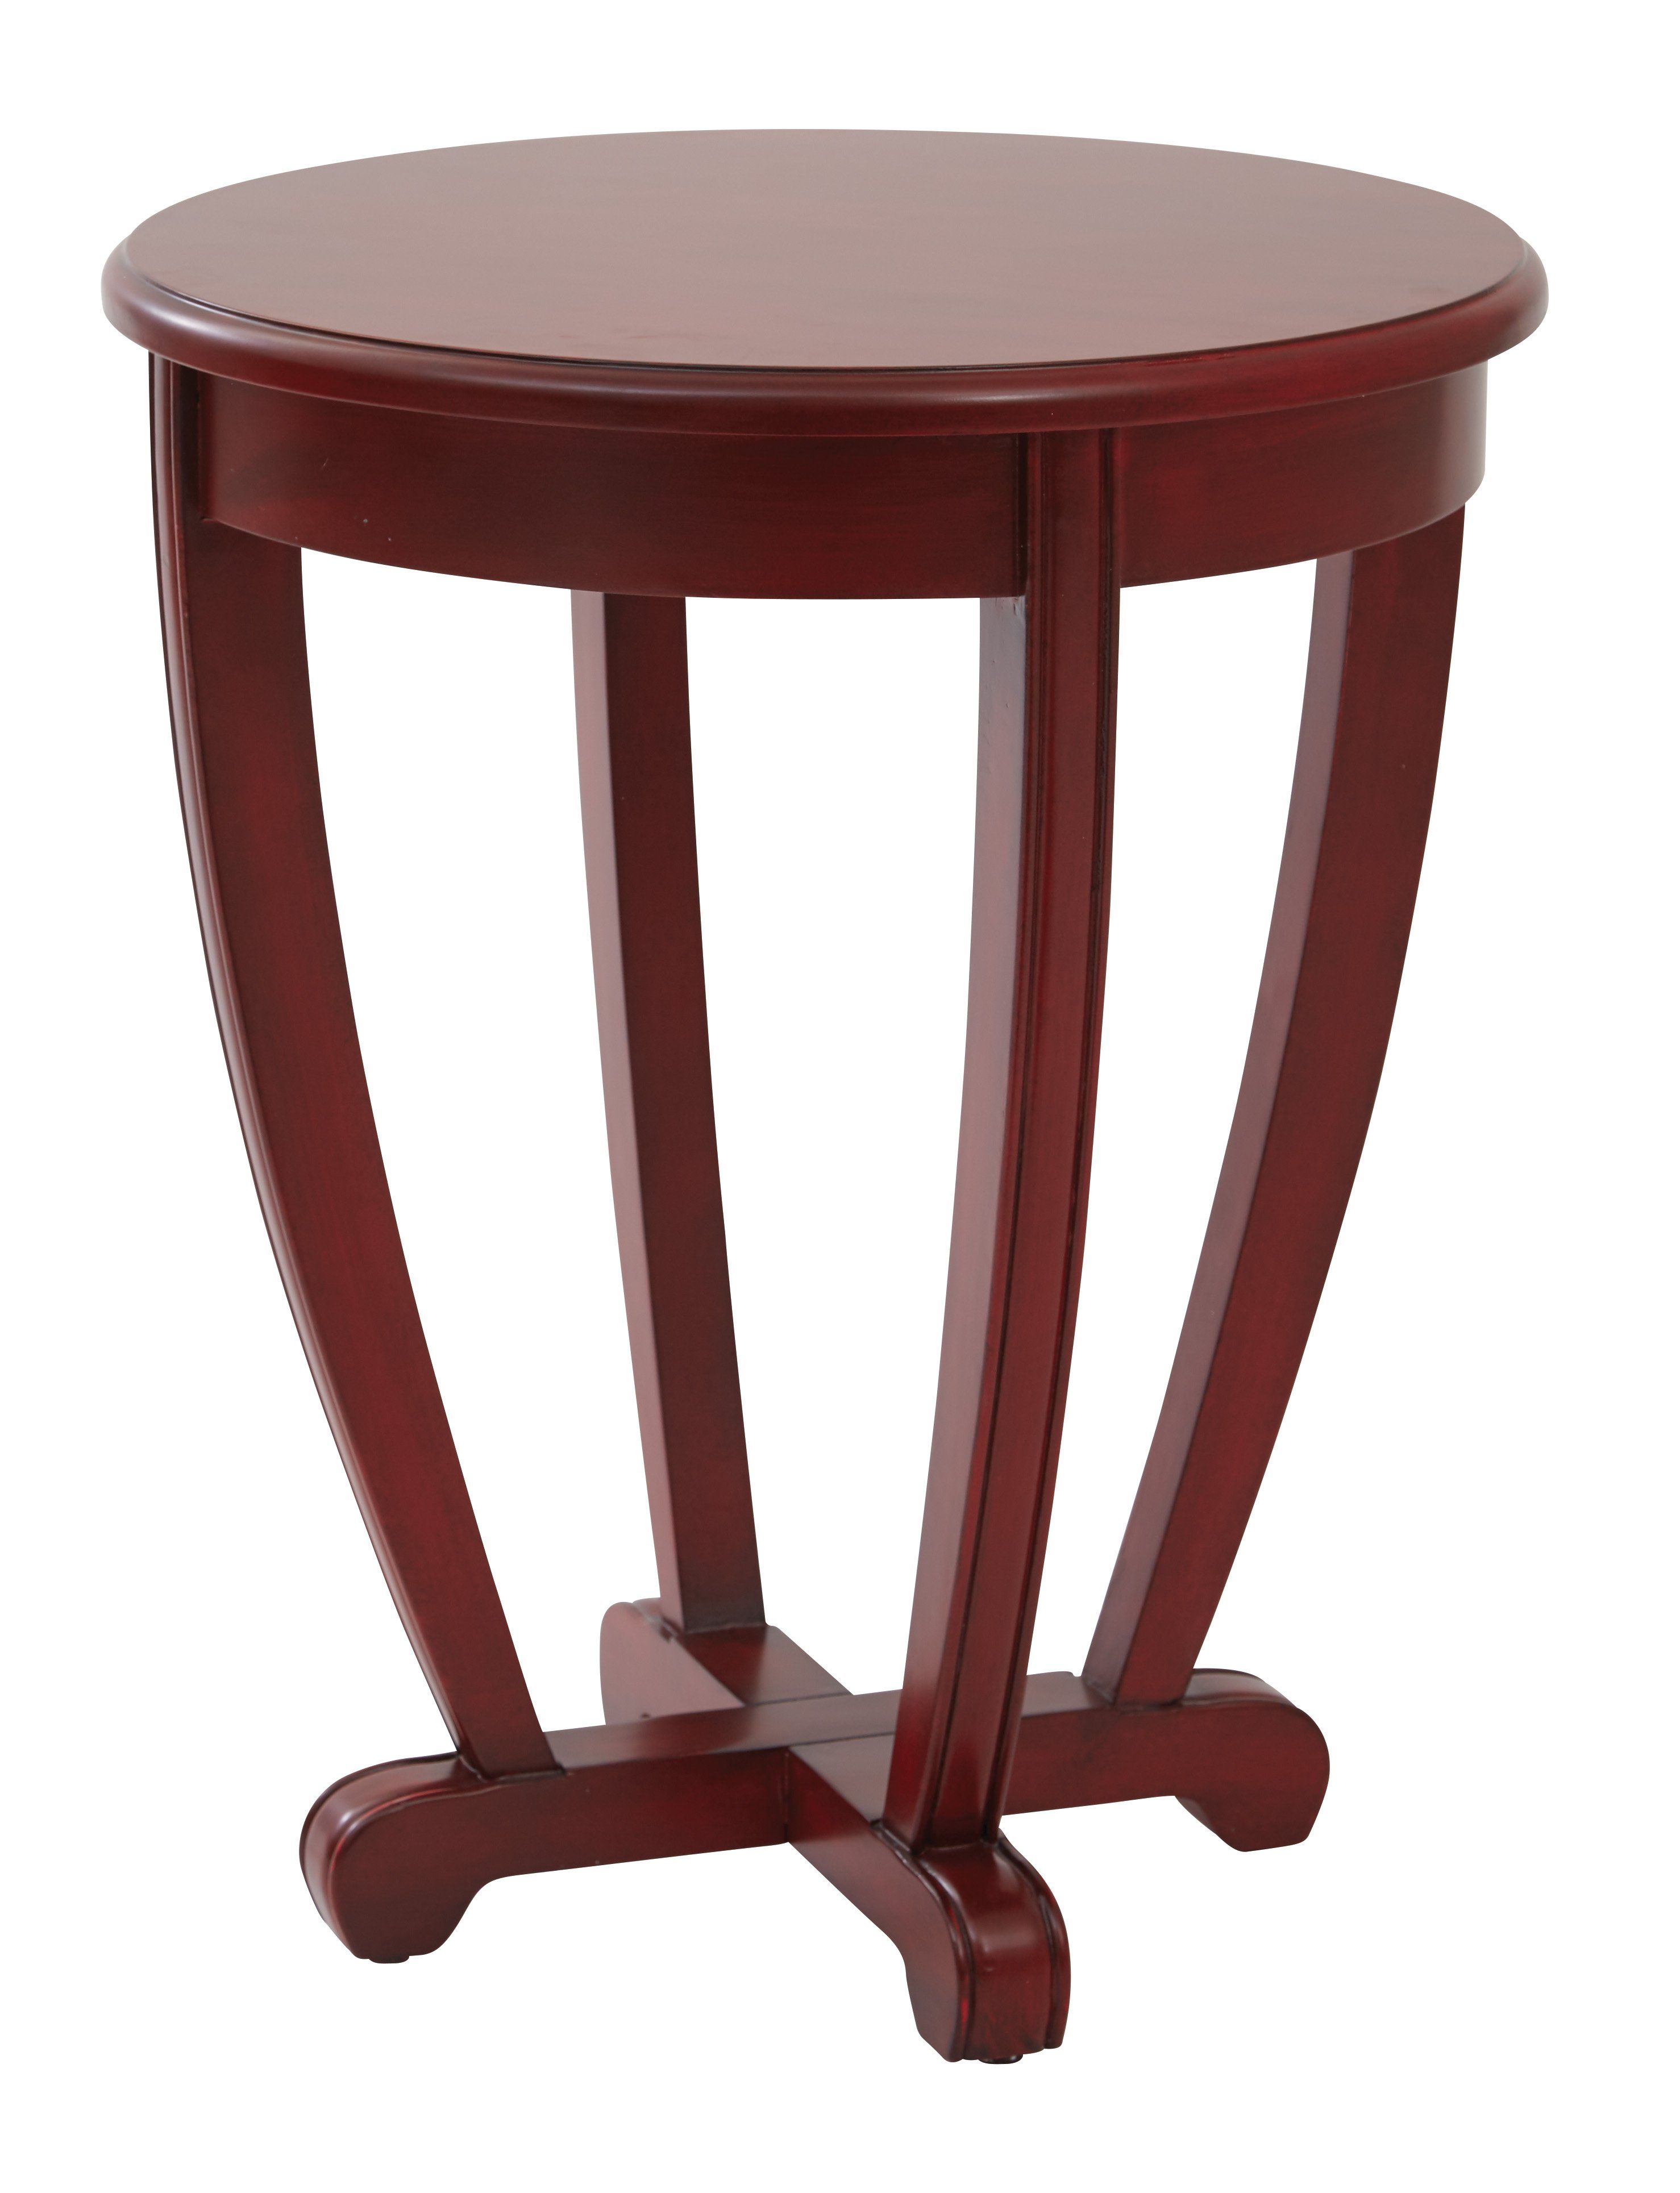 office star red tifton round accent table products small blue white porcelain lamp iron coffee legs inch end short narrow console gold floor mirror ikea cocktail tables and egg